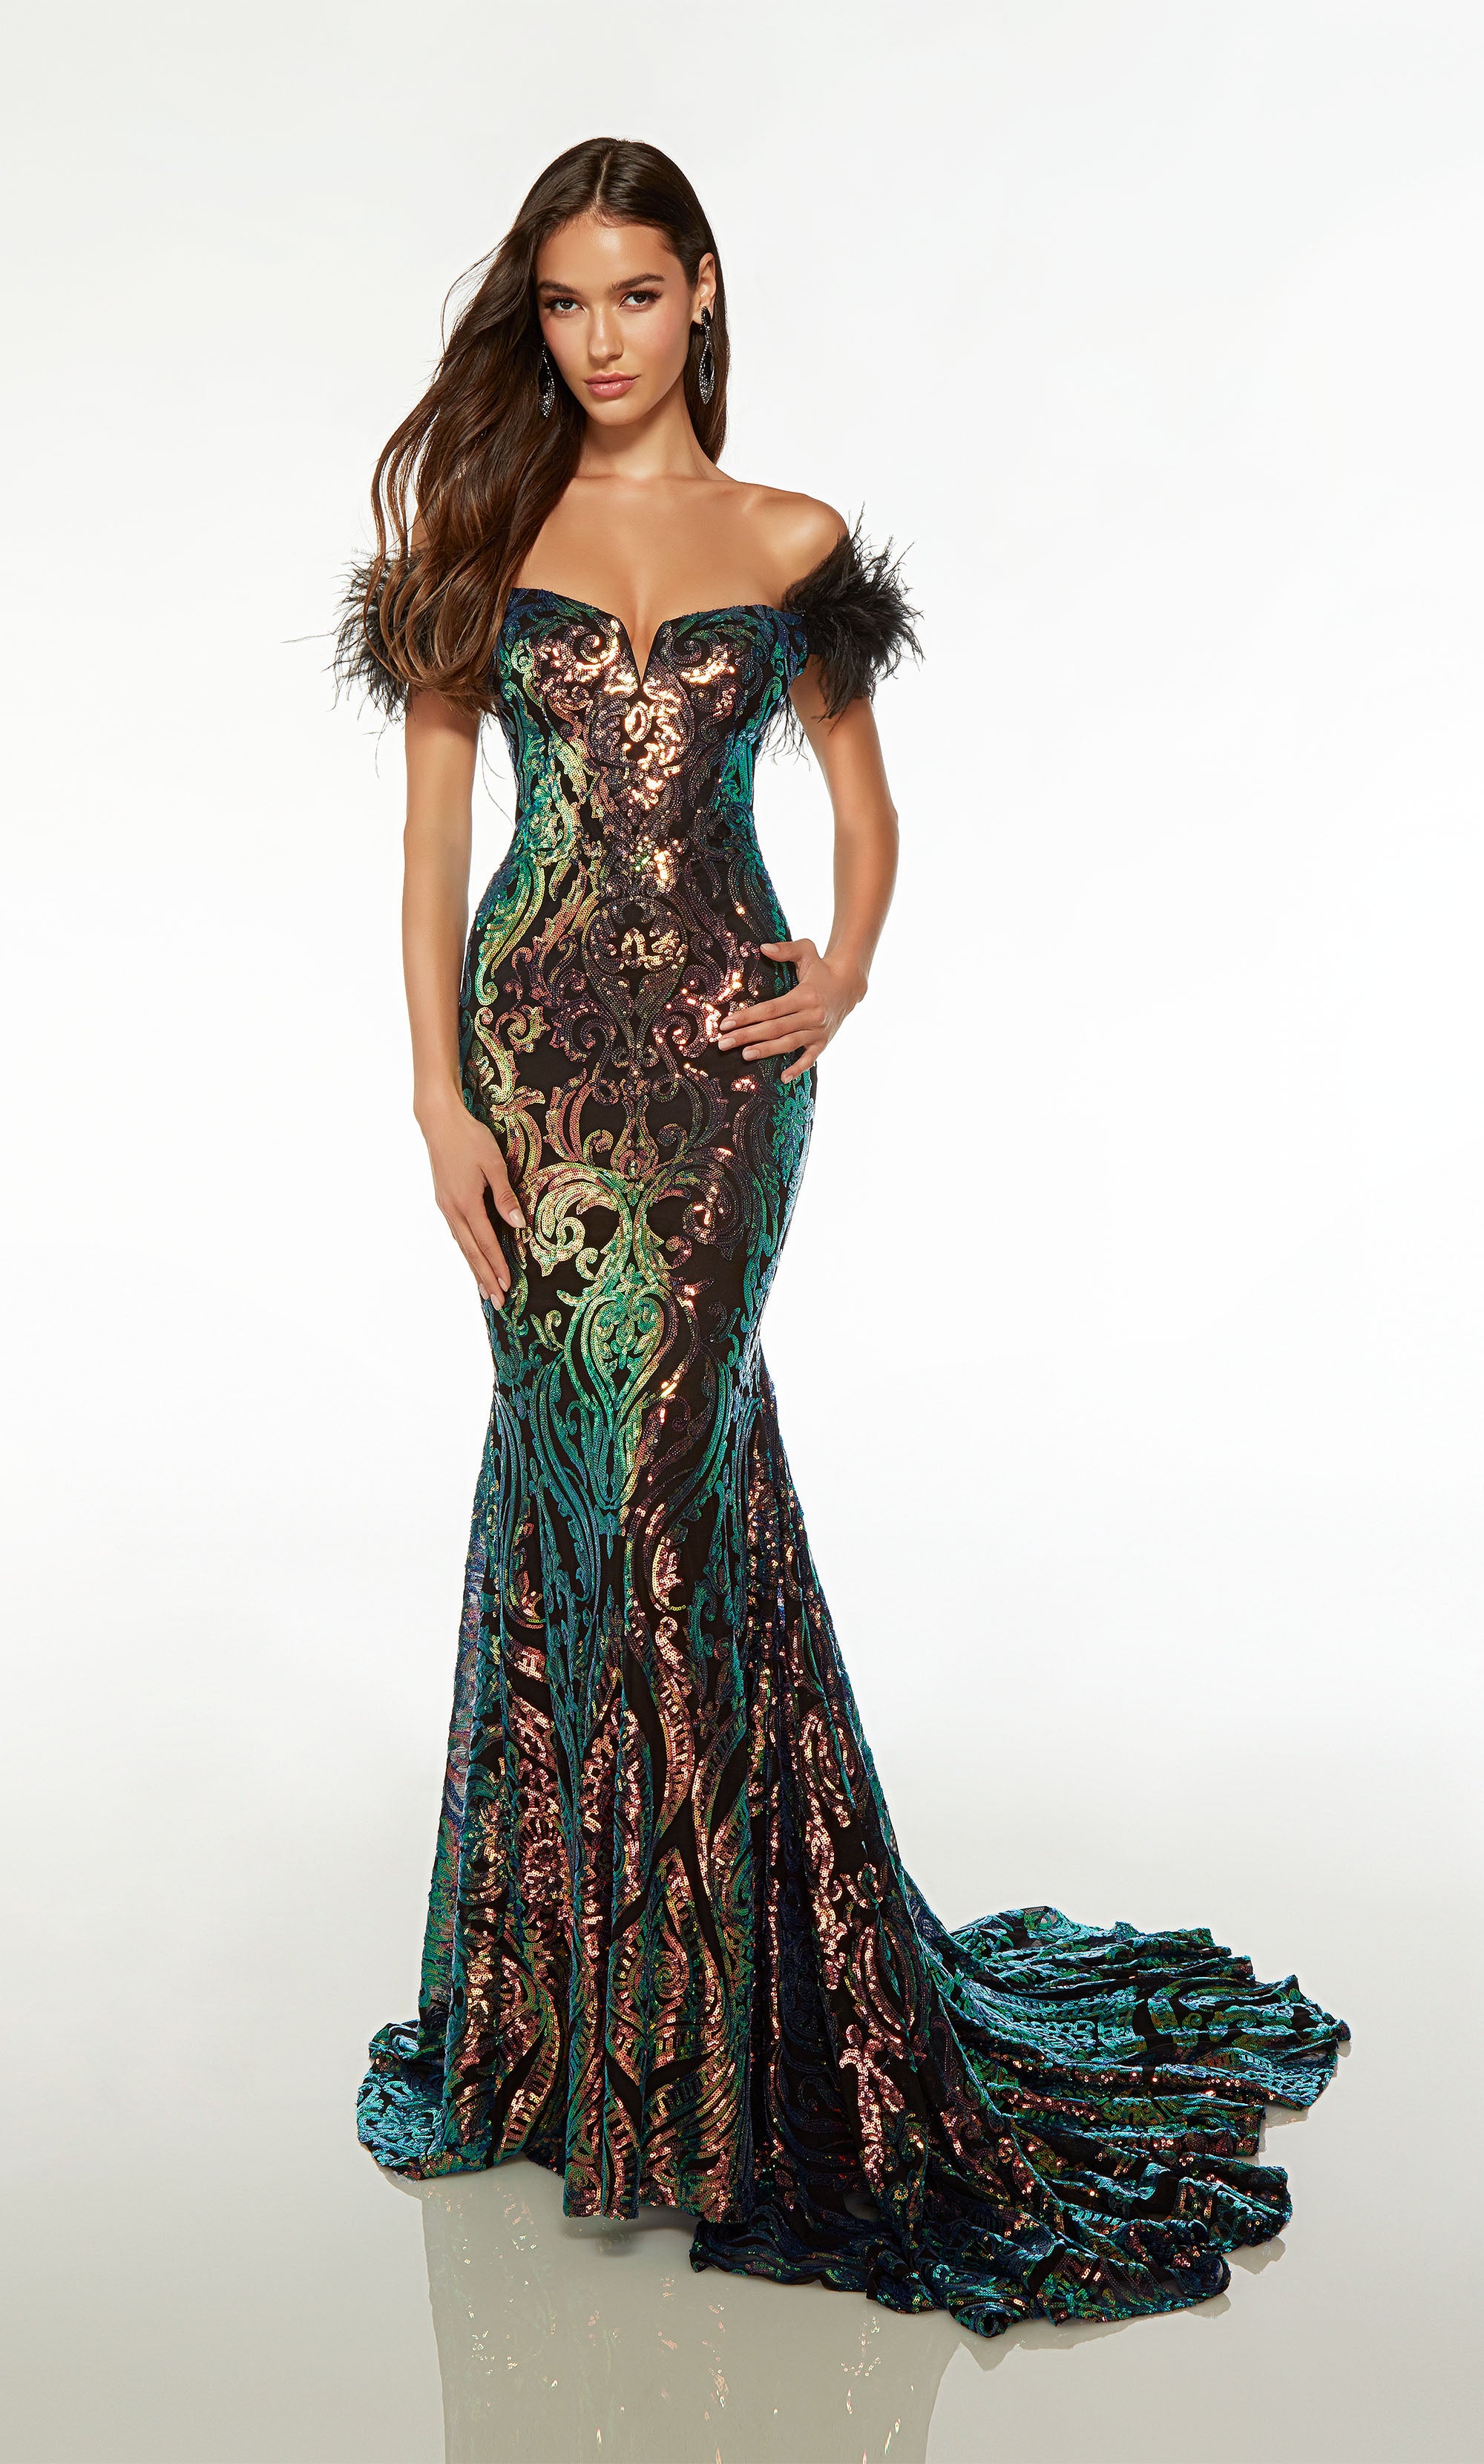 Elegant mermaid gown: off-shoulder, feather sleeves, fitted bodice, lace-up back, long train, paisley-patterned iridescent sequins.